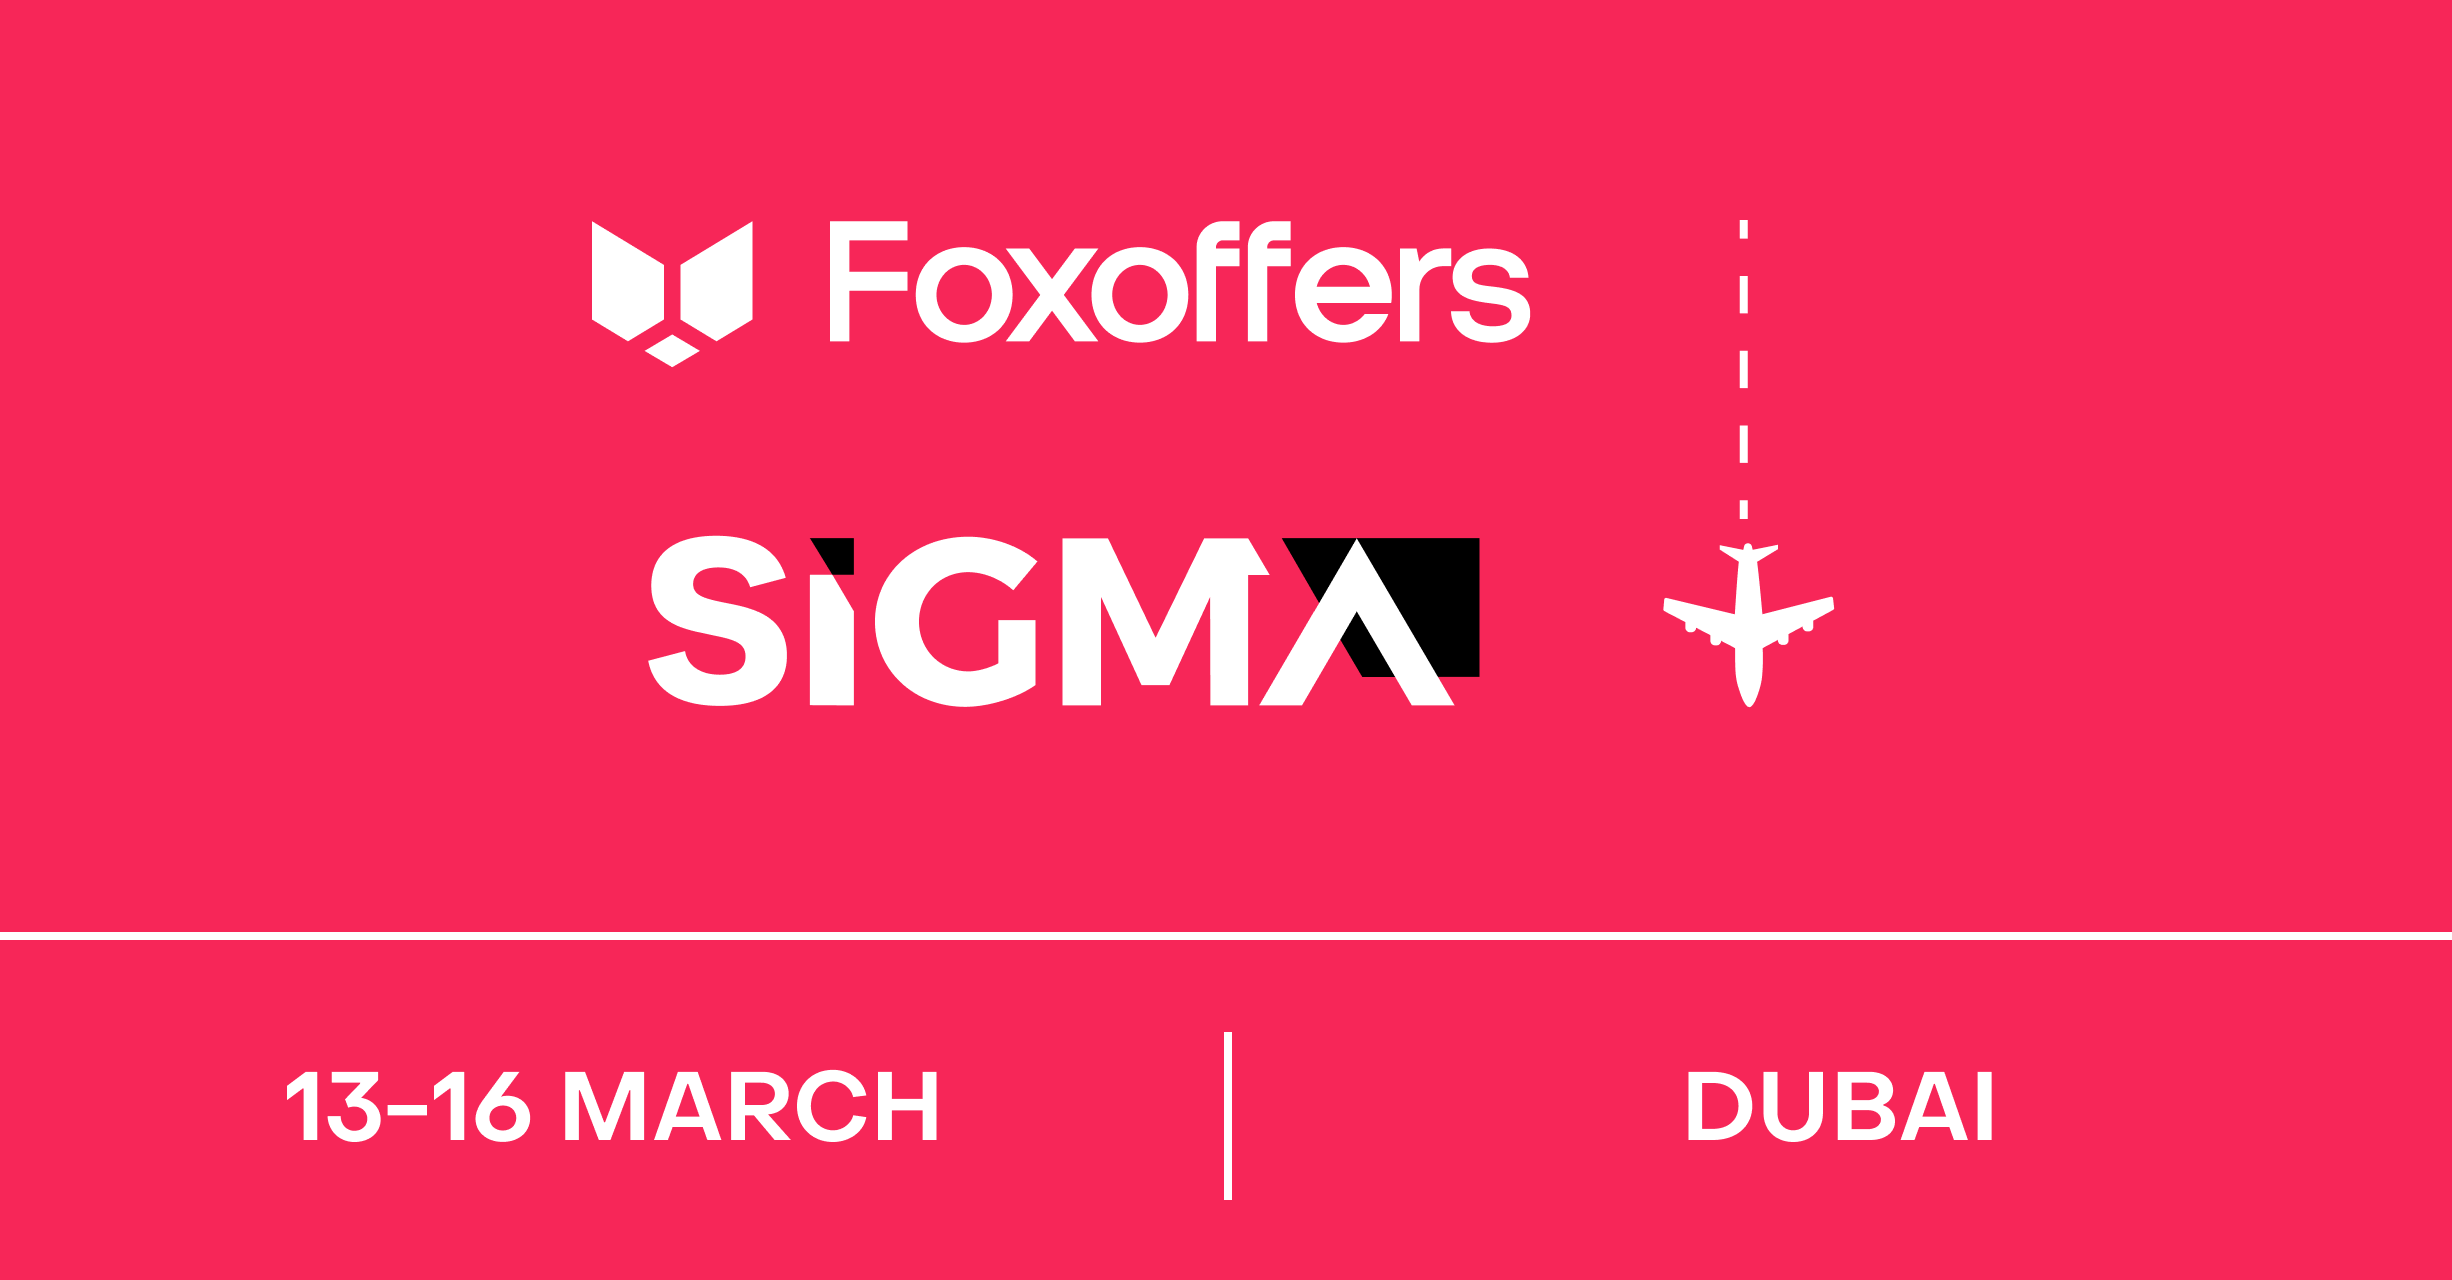 Foxoffers is heading to SiGMA